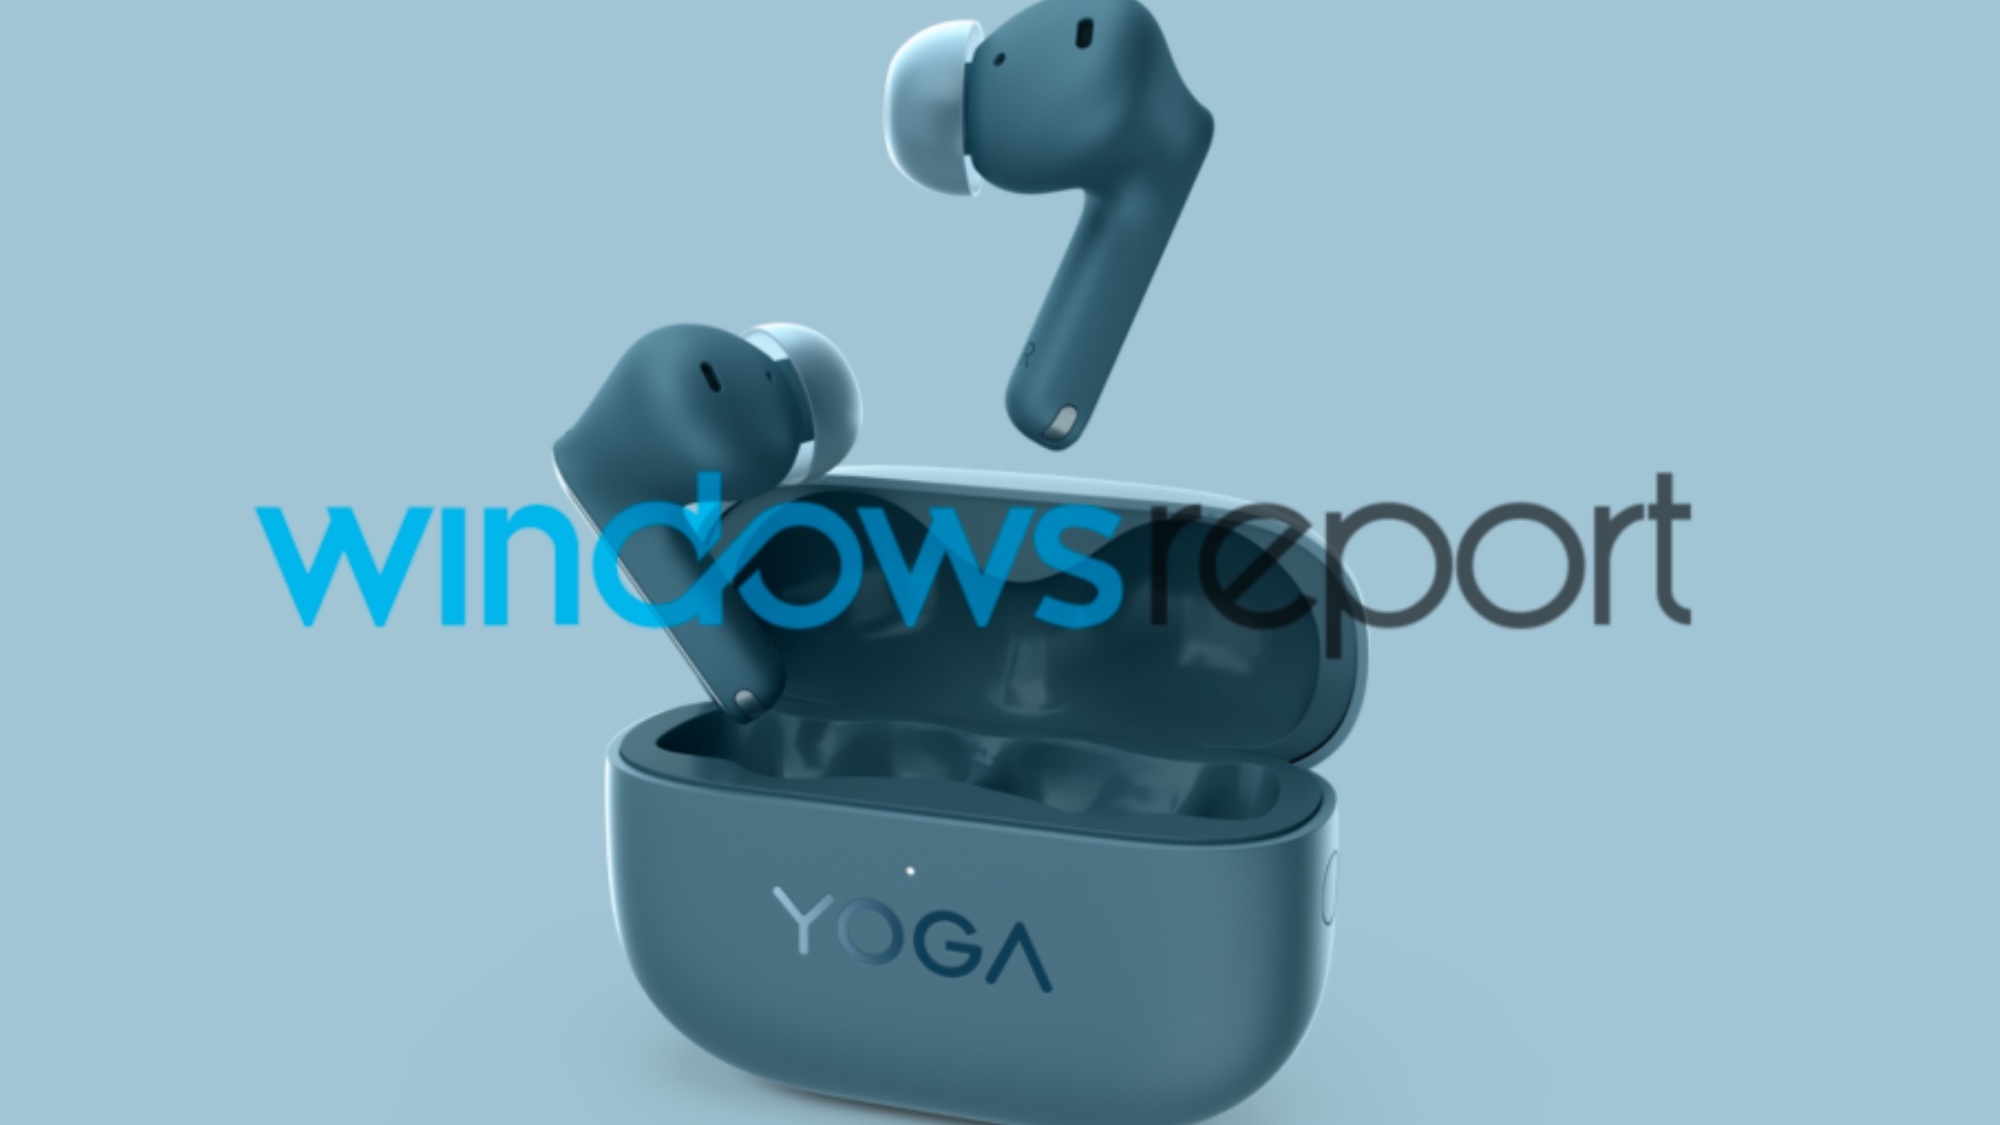 The purported Lenovo Yoga TWS Earbuds on a blue background. Image credit: Windows Report.